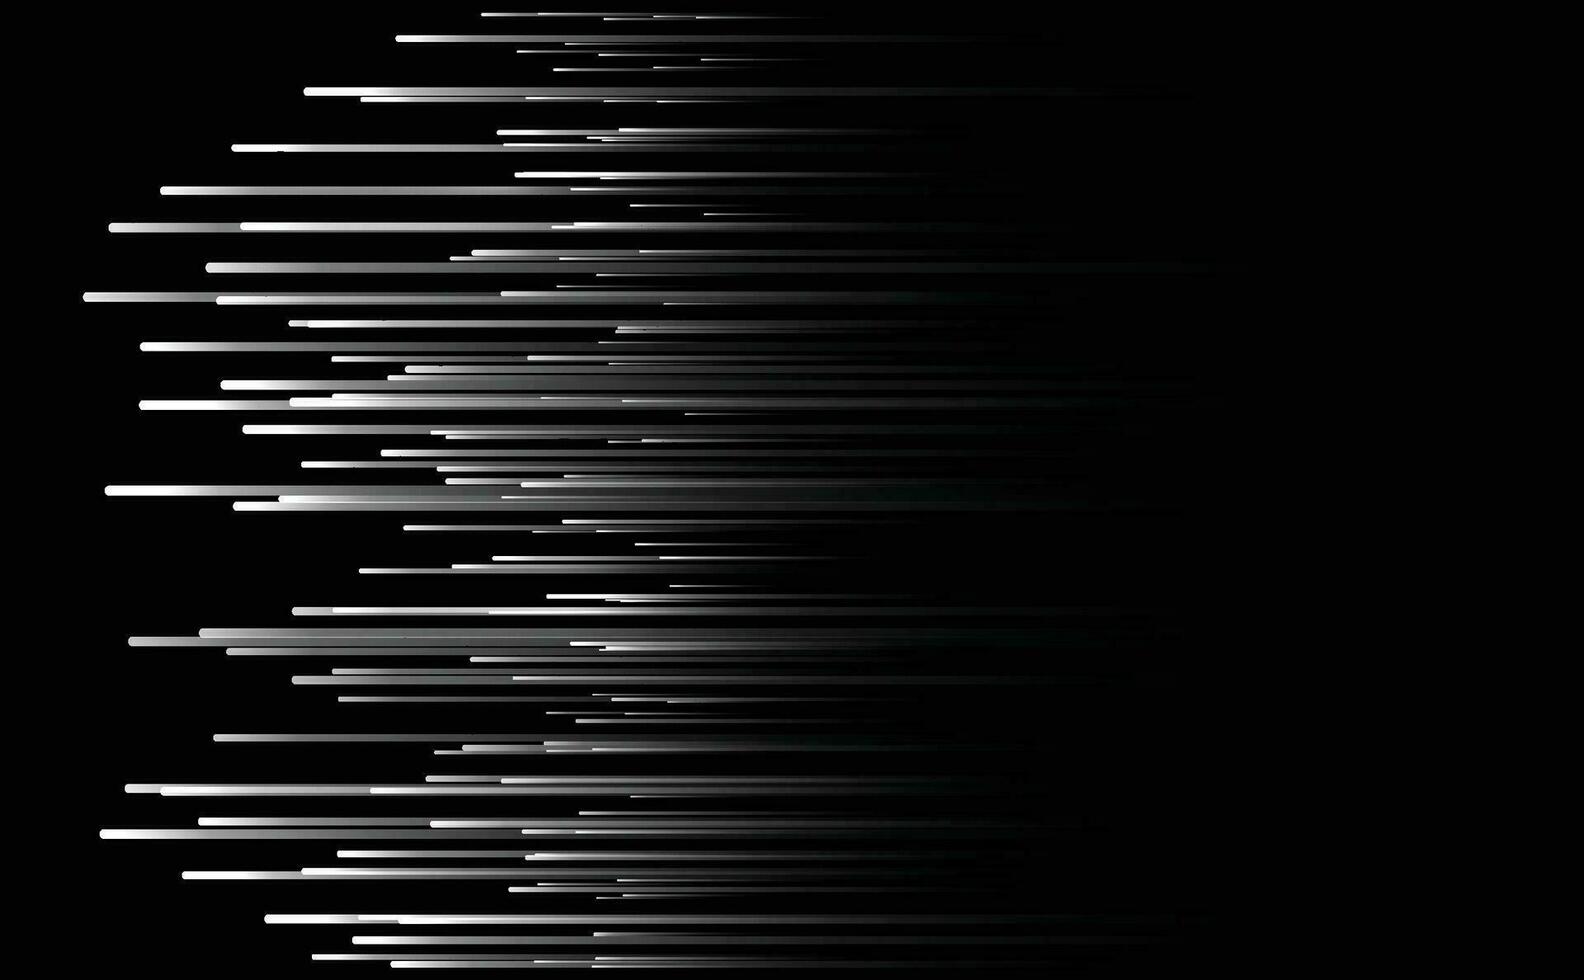 Horizontal Speed Lines for Comic Books. Manga, Anime Graphic Texture. Black and White Vector Background